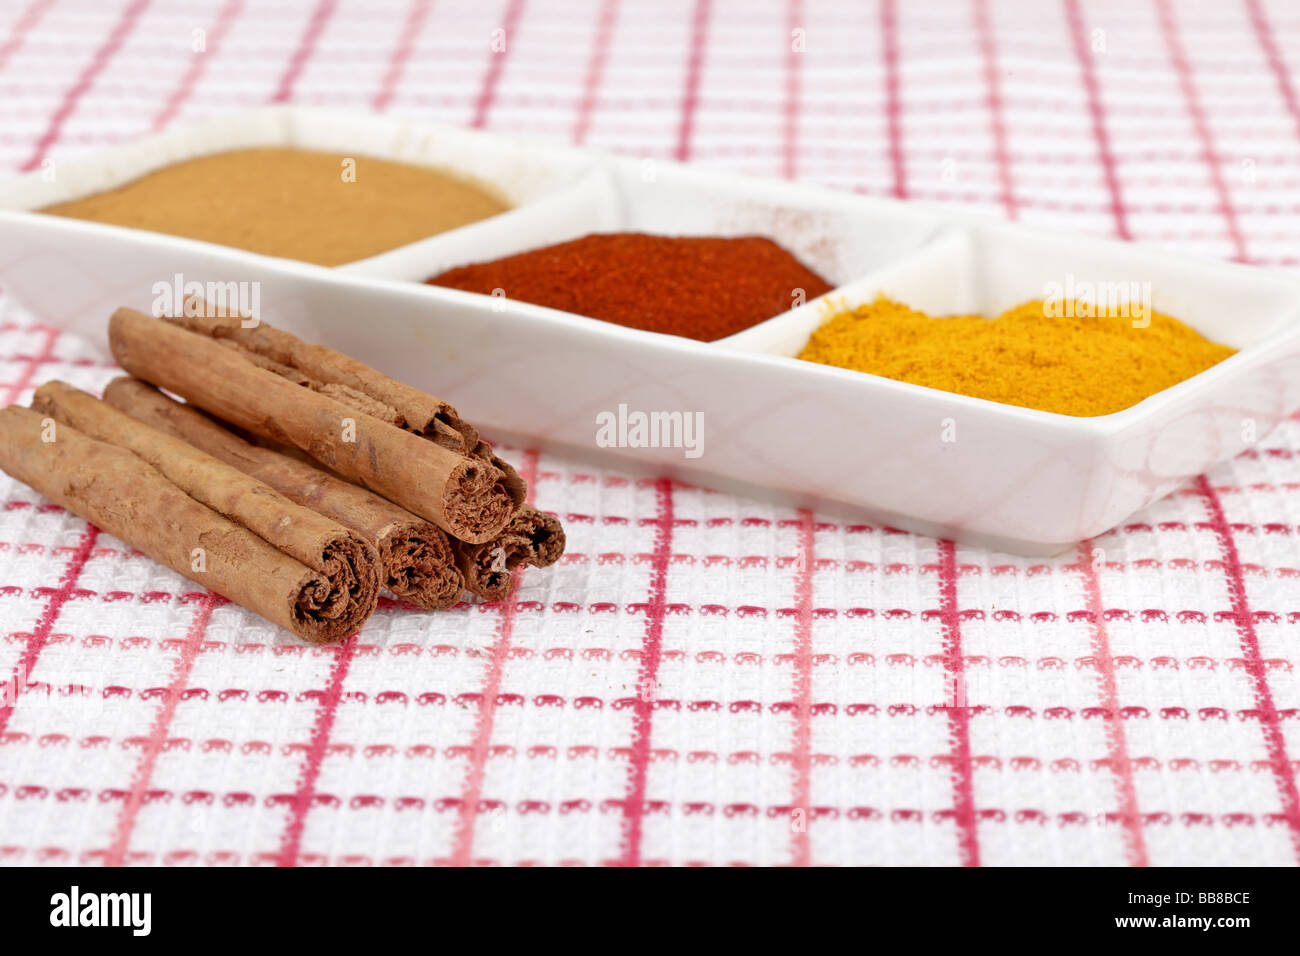 Cinnamon sticks with other spices used in cooking Stock Photo